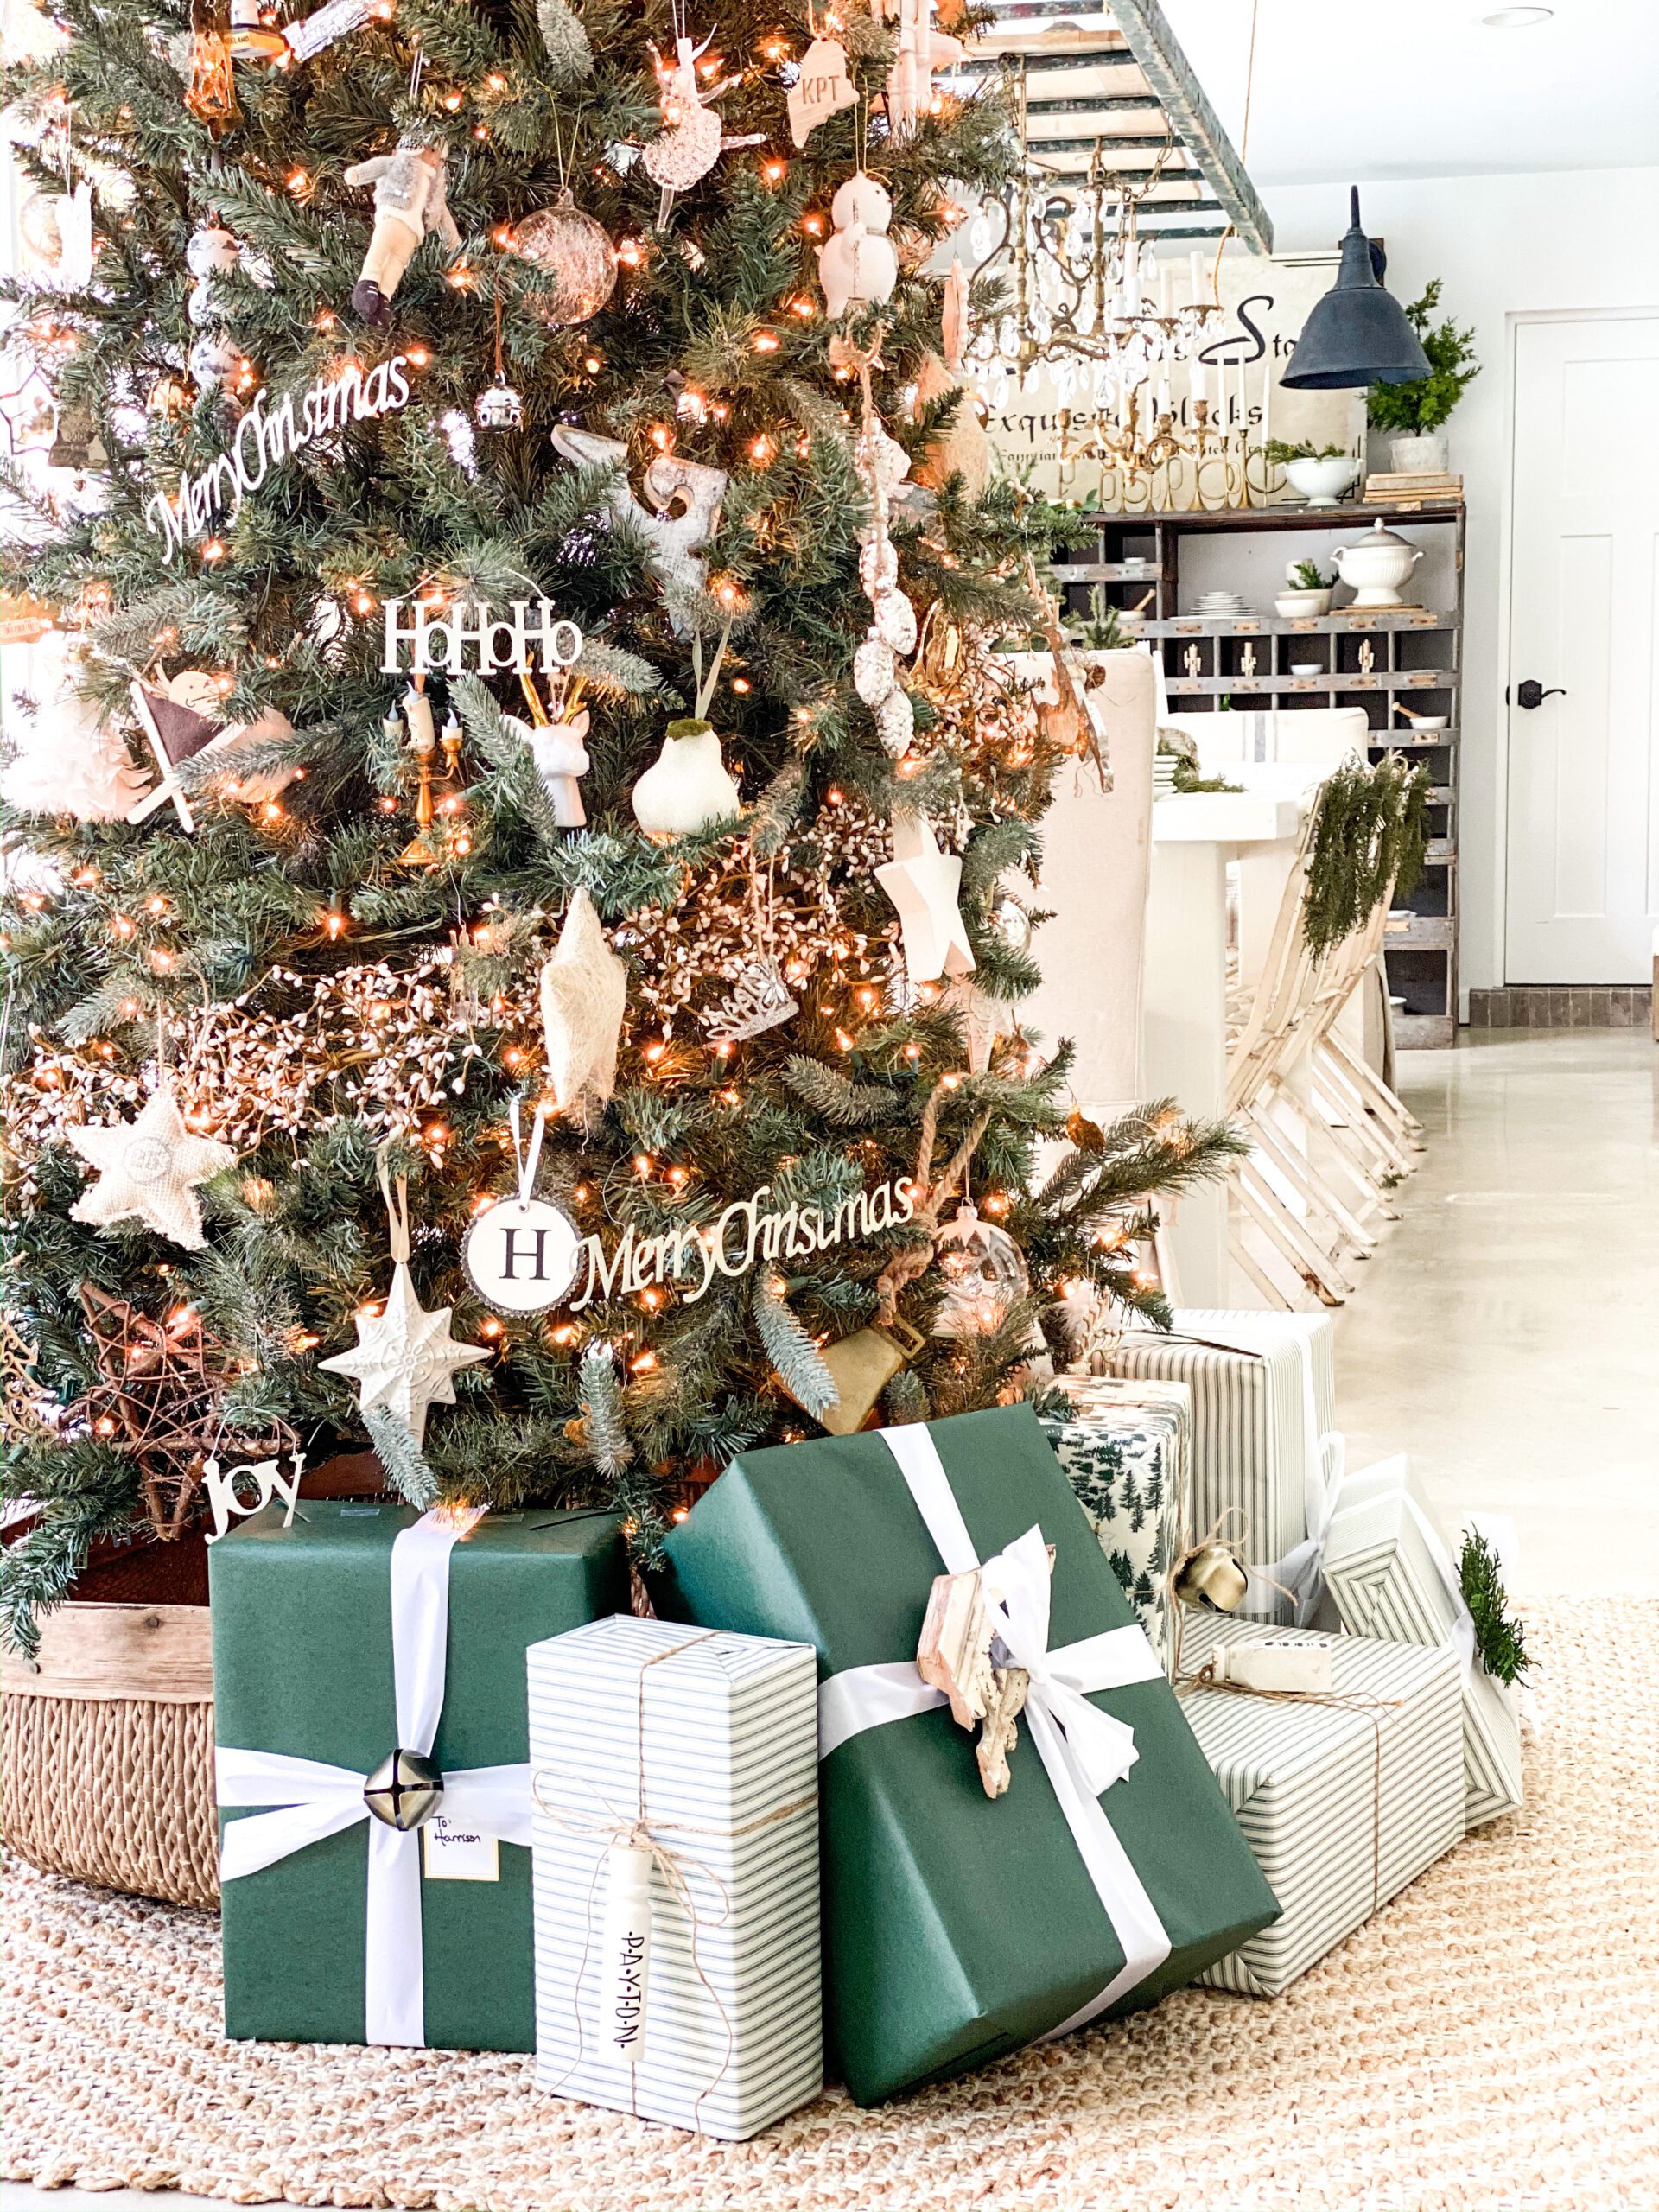 5 Easy Ways to Make Your Gift Wrapping Look Special